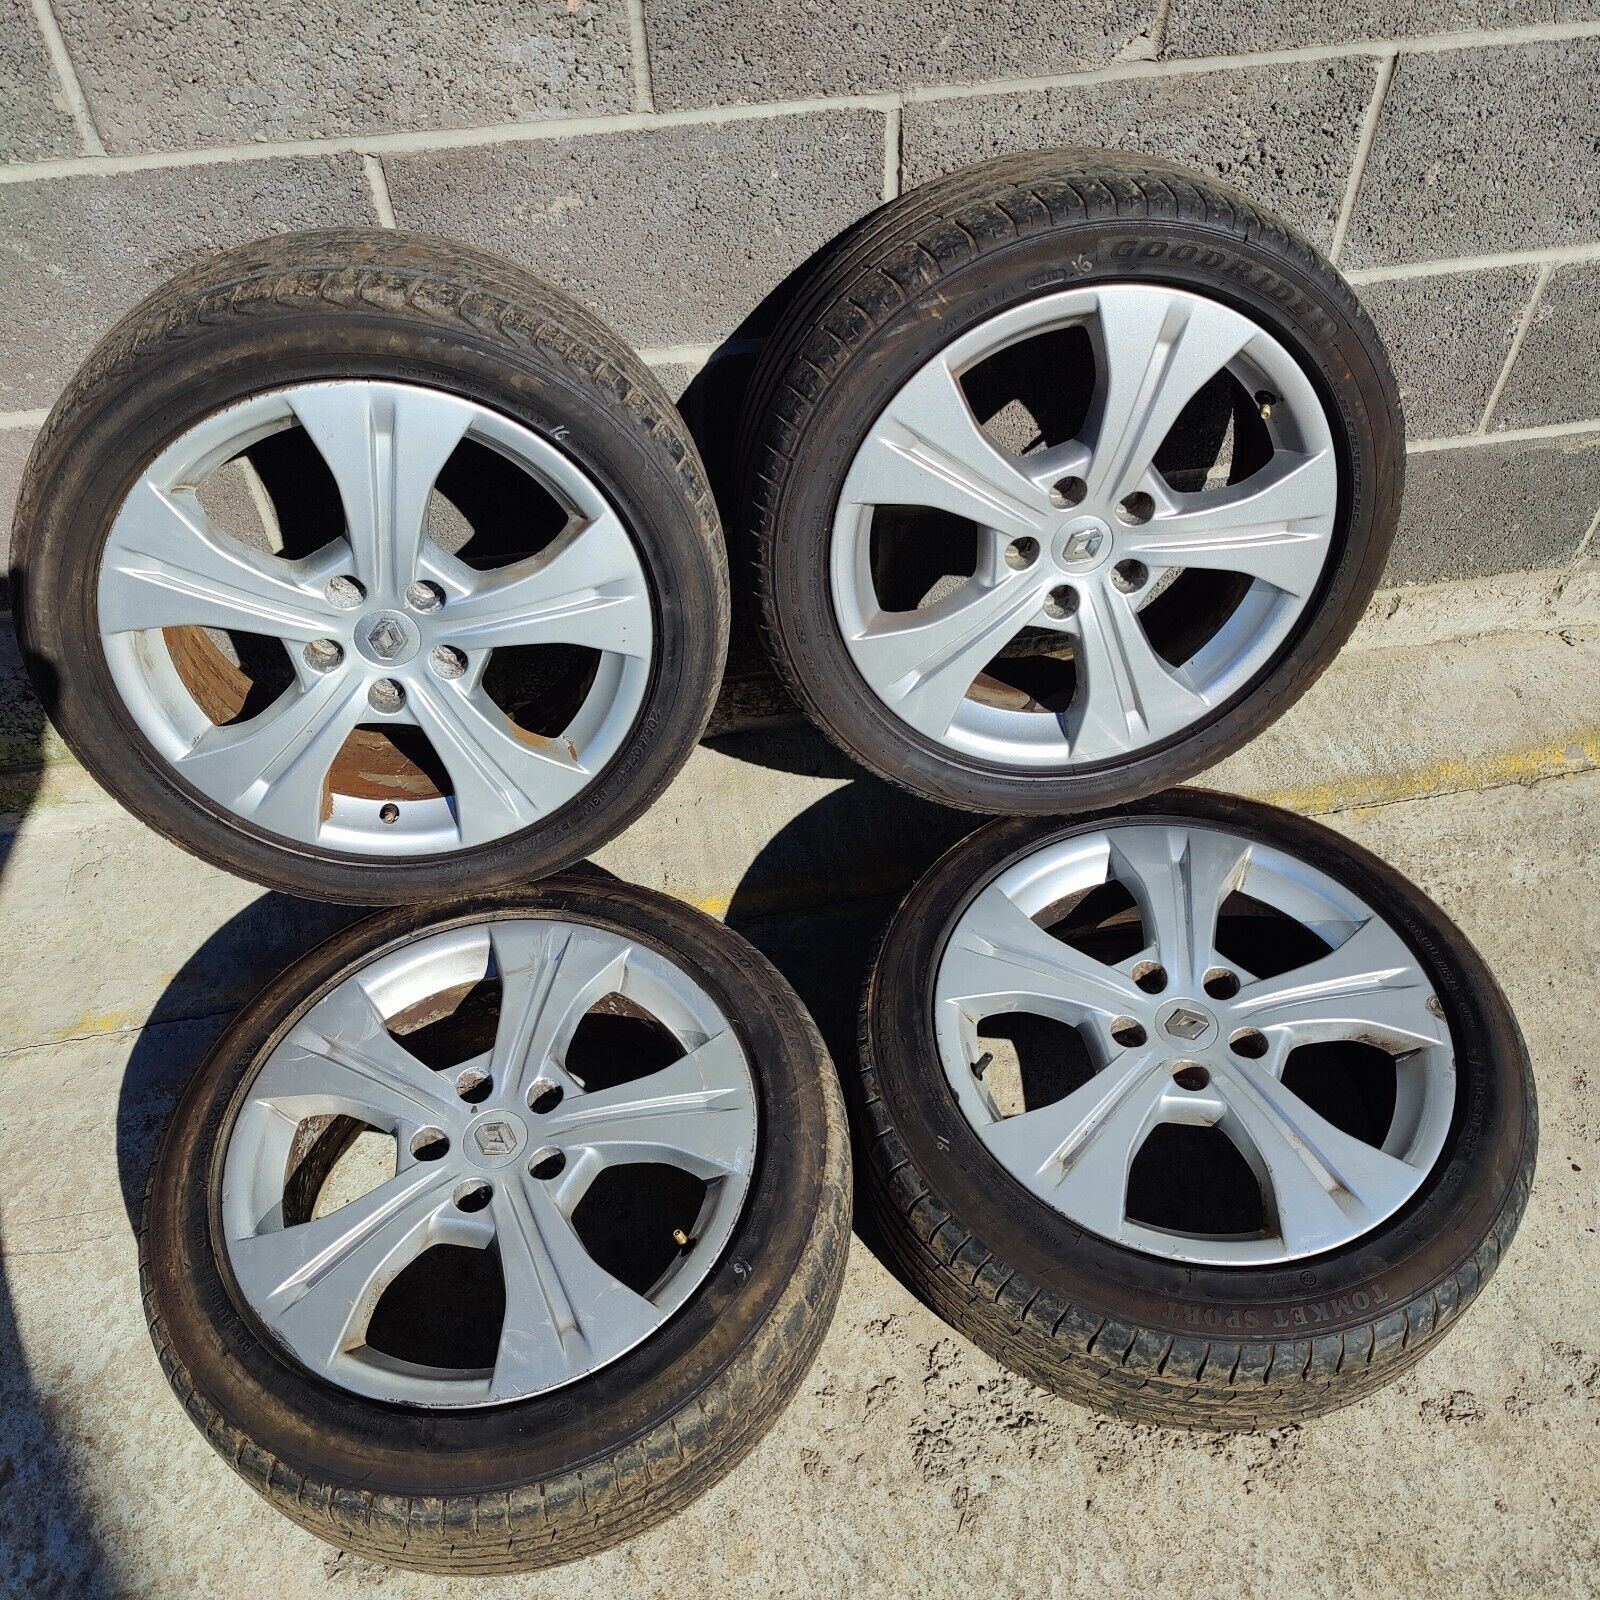 RENAULT MEGANE ALLOY WHEELS WITH TYRES 205/50 R17